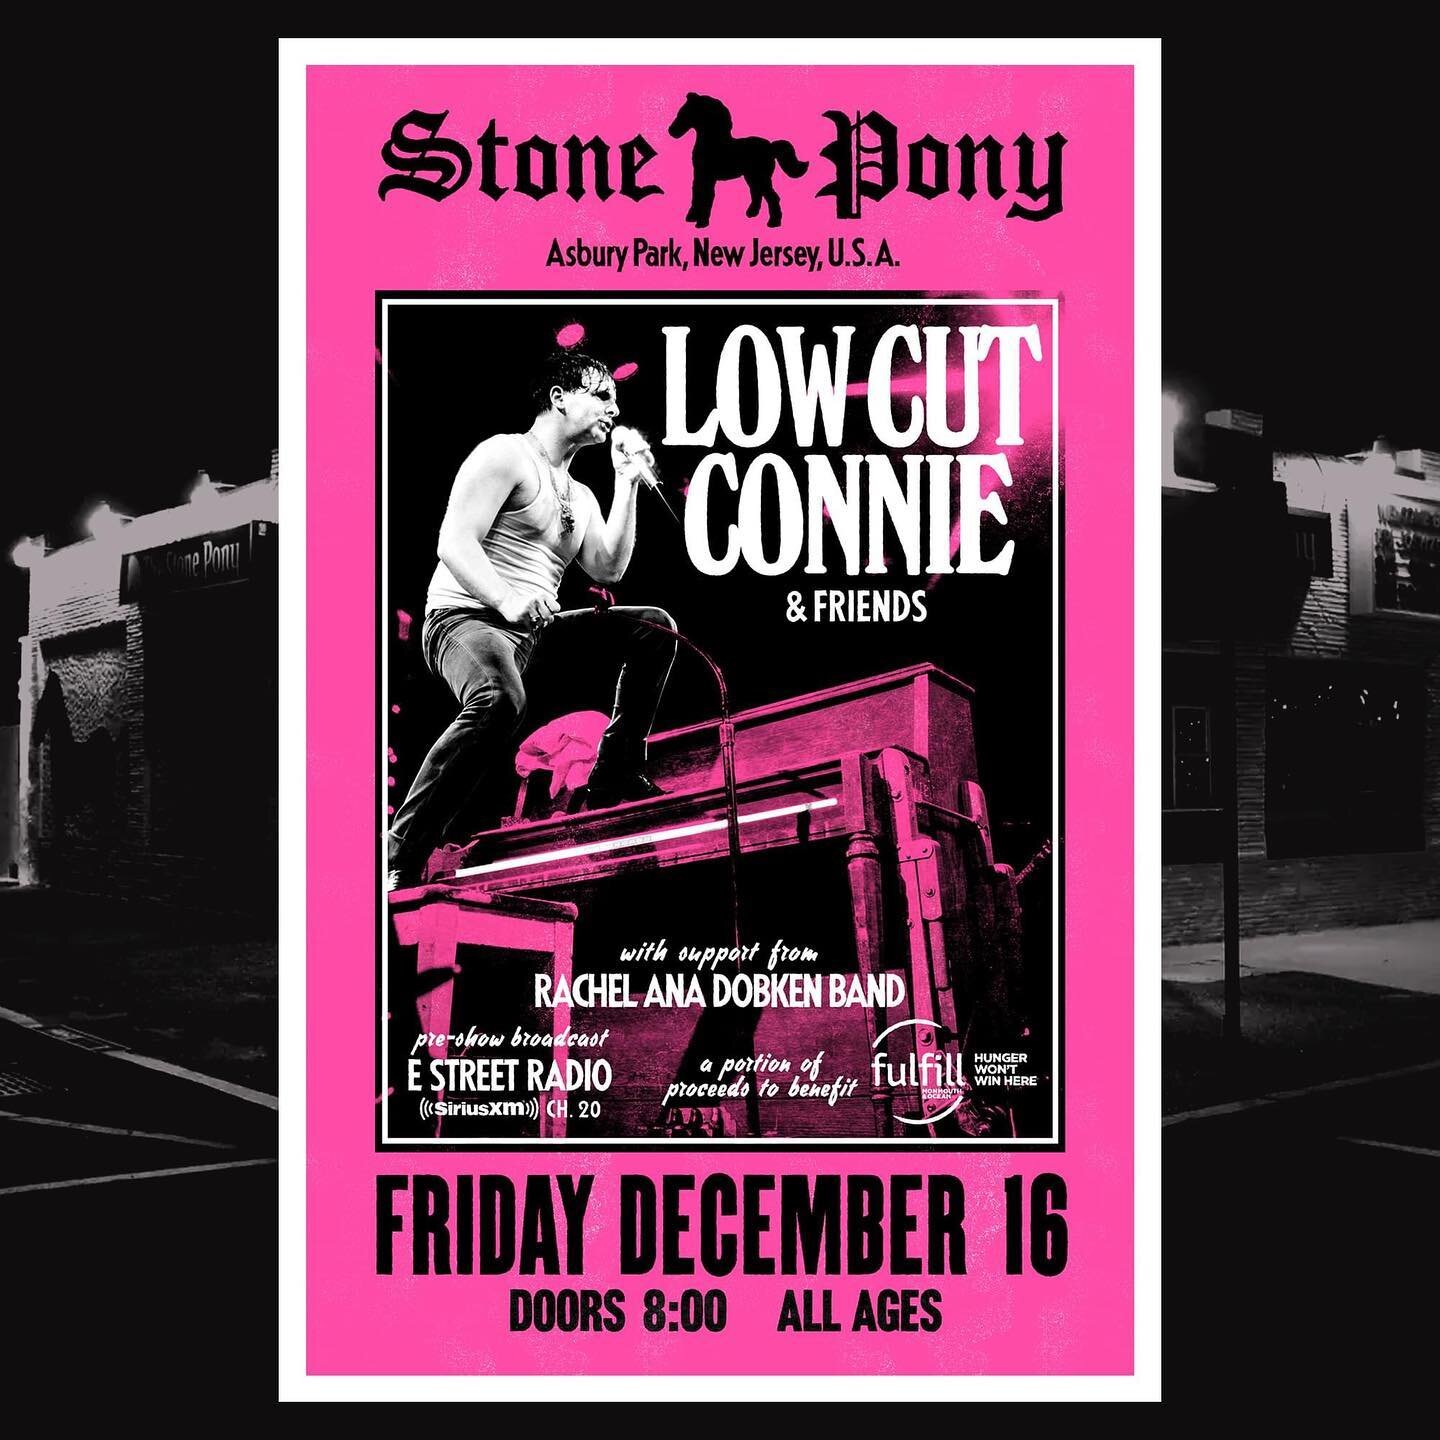 ✨NEXT UP✨ we&rsquo;ll be supporting the @lowcutconnie fam @the_stone_pony FRI 12.16!! So beyond stoked and honored! Snag tix while yah can it&rsquo;s gonna be a big one!!! Show was moved from 12/15 to 16, but all tix purchased will be honored. ✨ A po